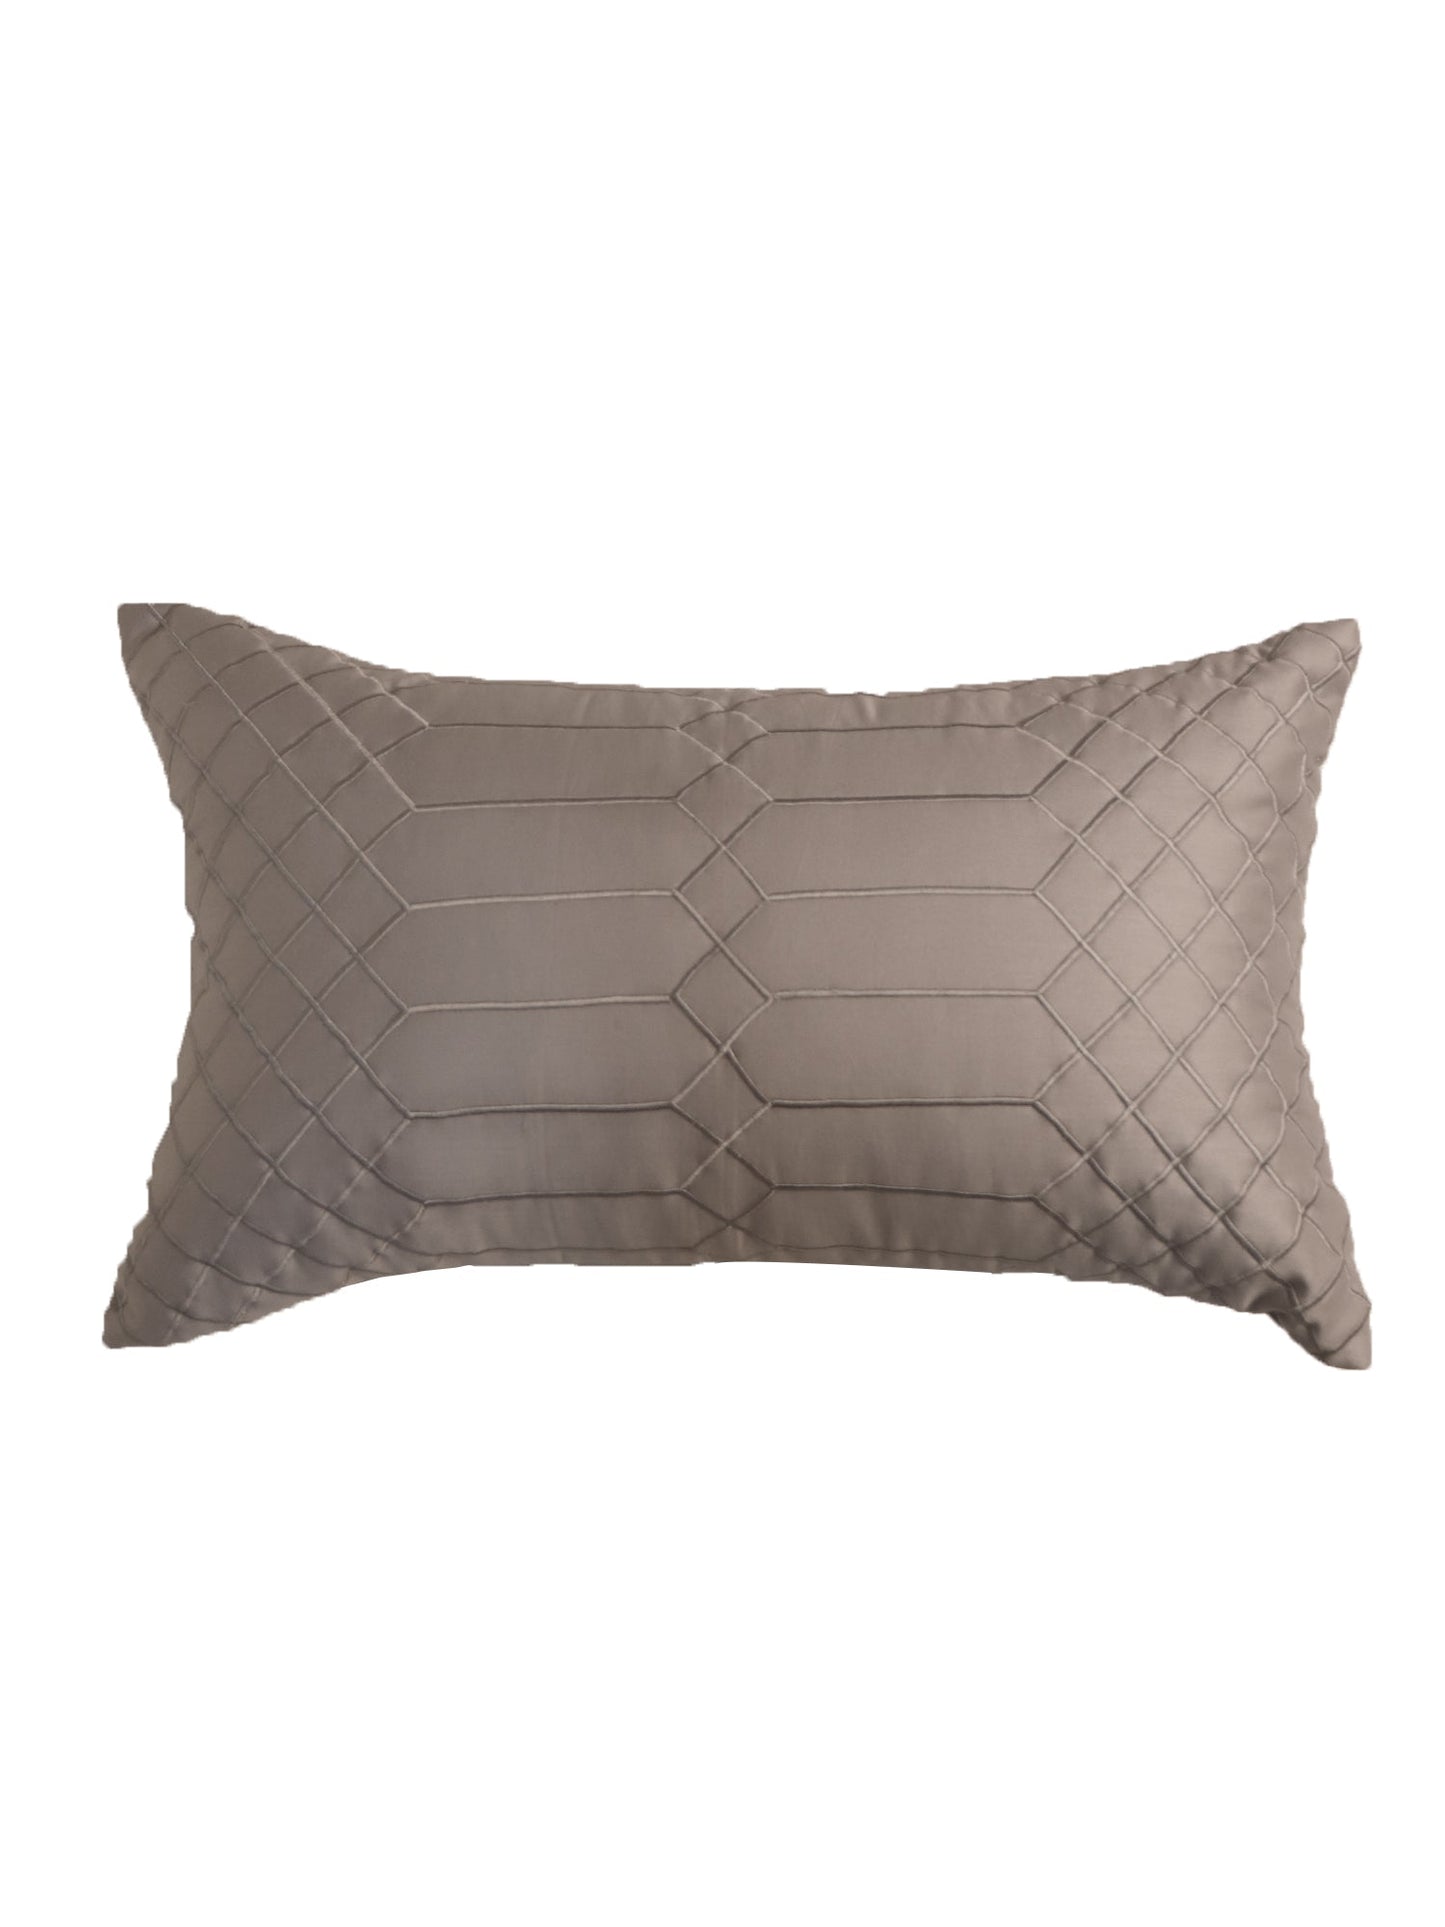 Cushion Cover 100% Cotton 520TC Quilted with Hand Embroidered Grey - 12x20